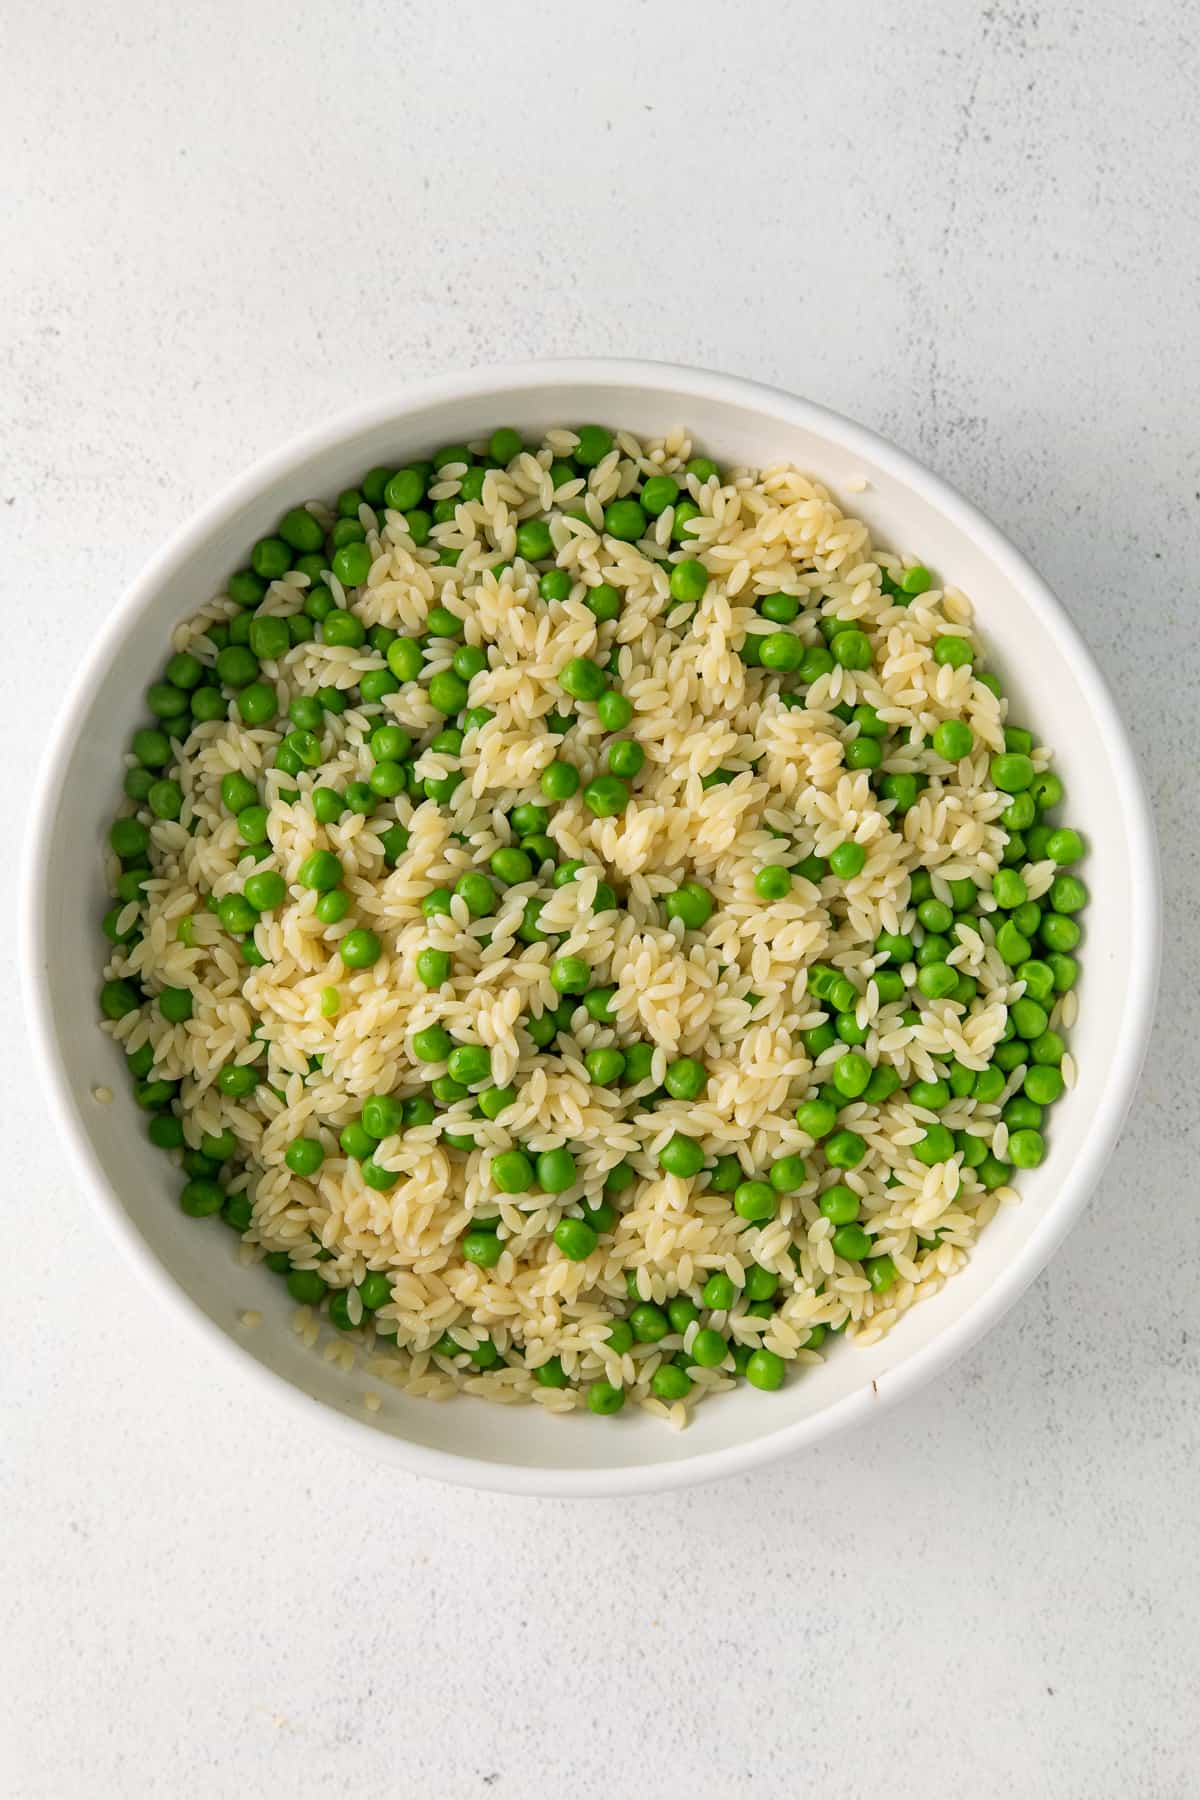 Peas and orzo in a bowl.